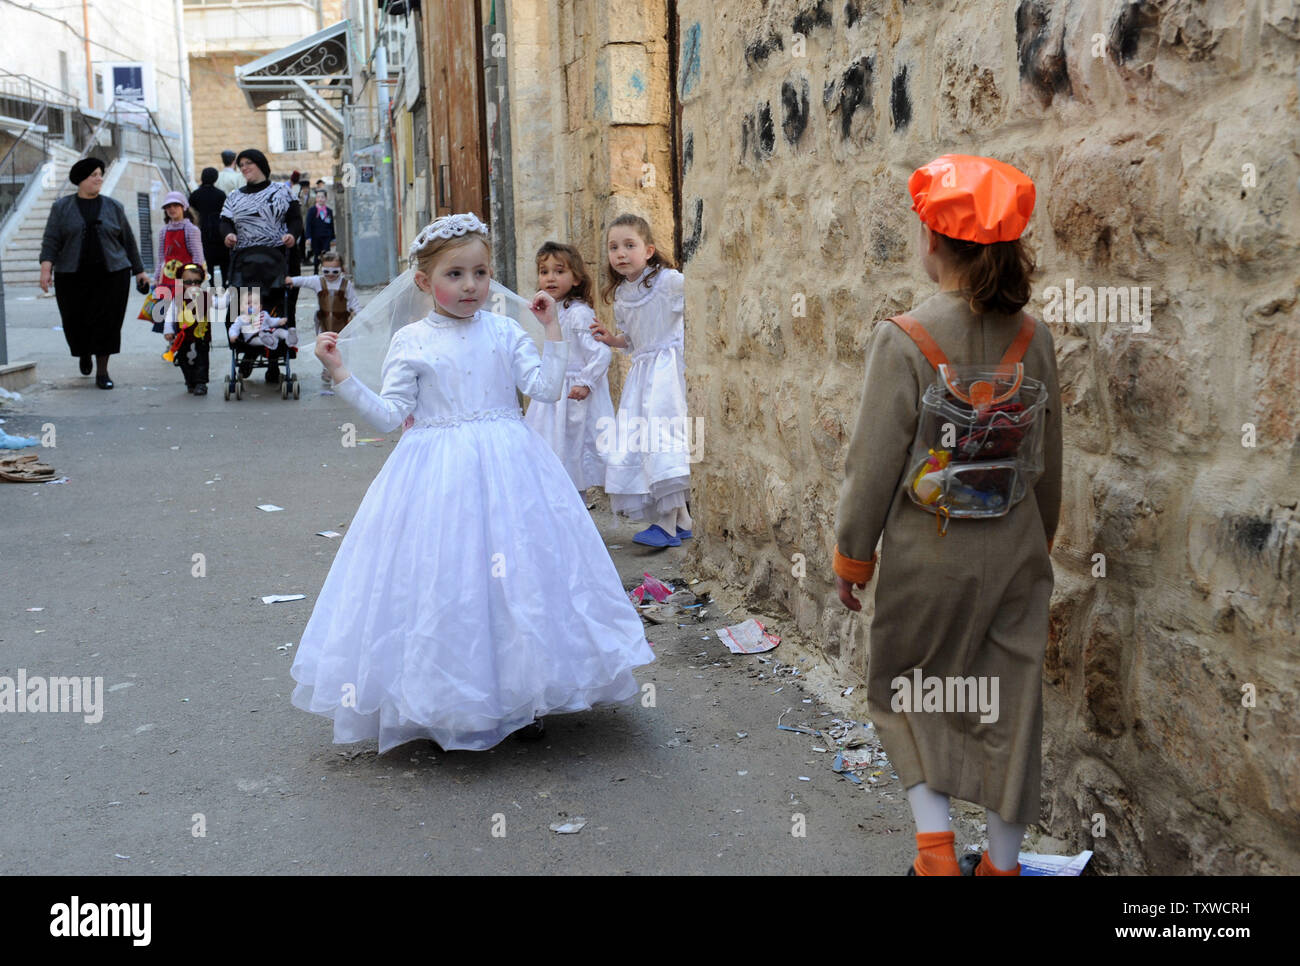 An Ultra-Orthodox Jewish girl, dressed as Queen Esther, celebrates  the Jewish holiday of Purim in the Mea Shearim neighborhood in Jerusalem, March 9, 2012. The festival of Purim commemorates the rescue of Jews from genocide in ancient Persia as told in the book of Esther.  UPI/Debbie Hill Stock Photo